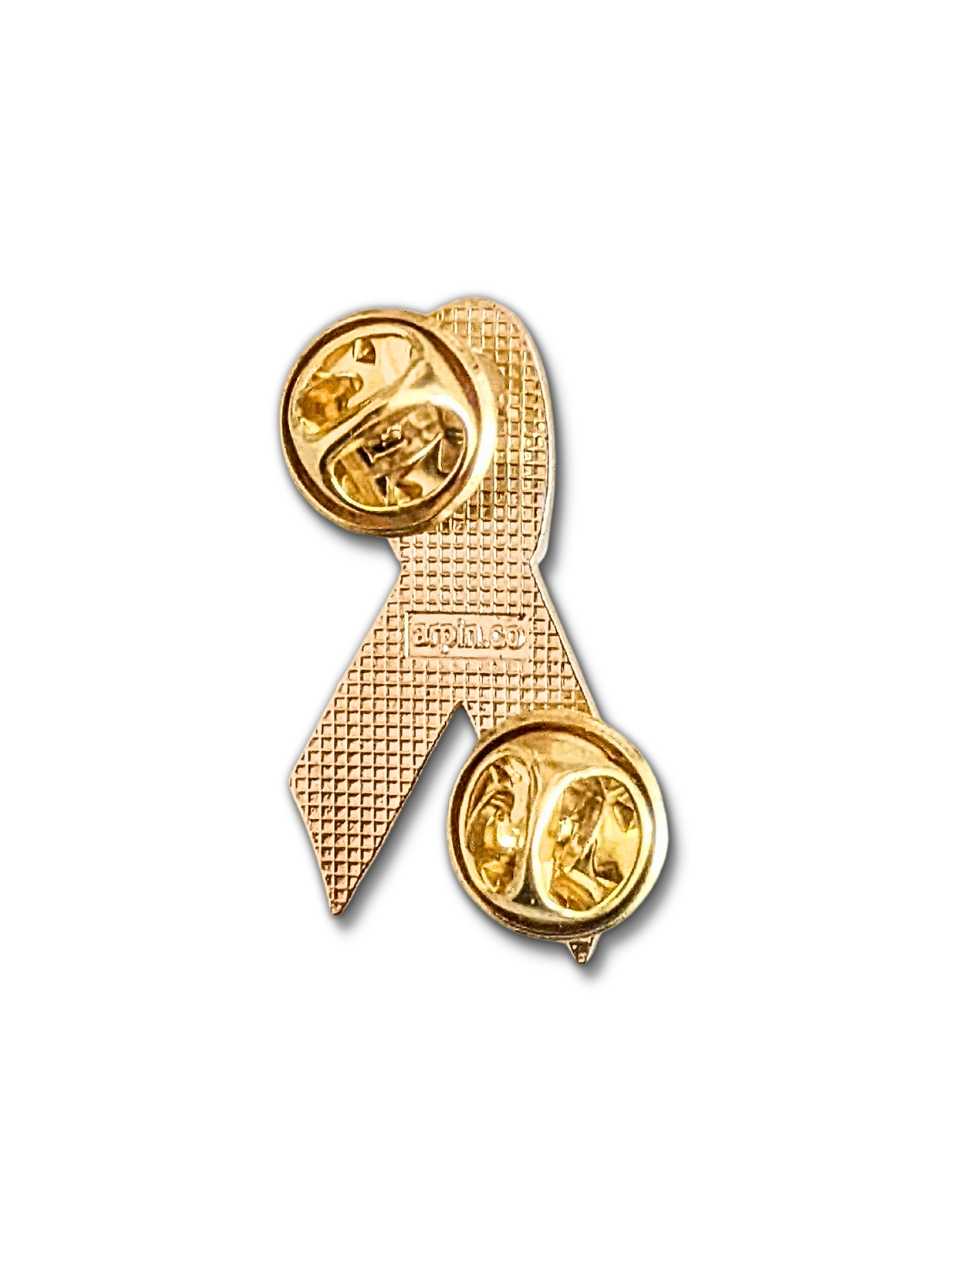 Support Our Troops Awareness Ribbon Lapel Pin